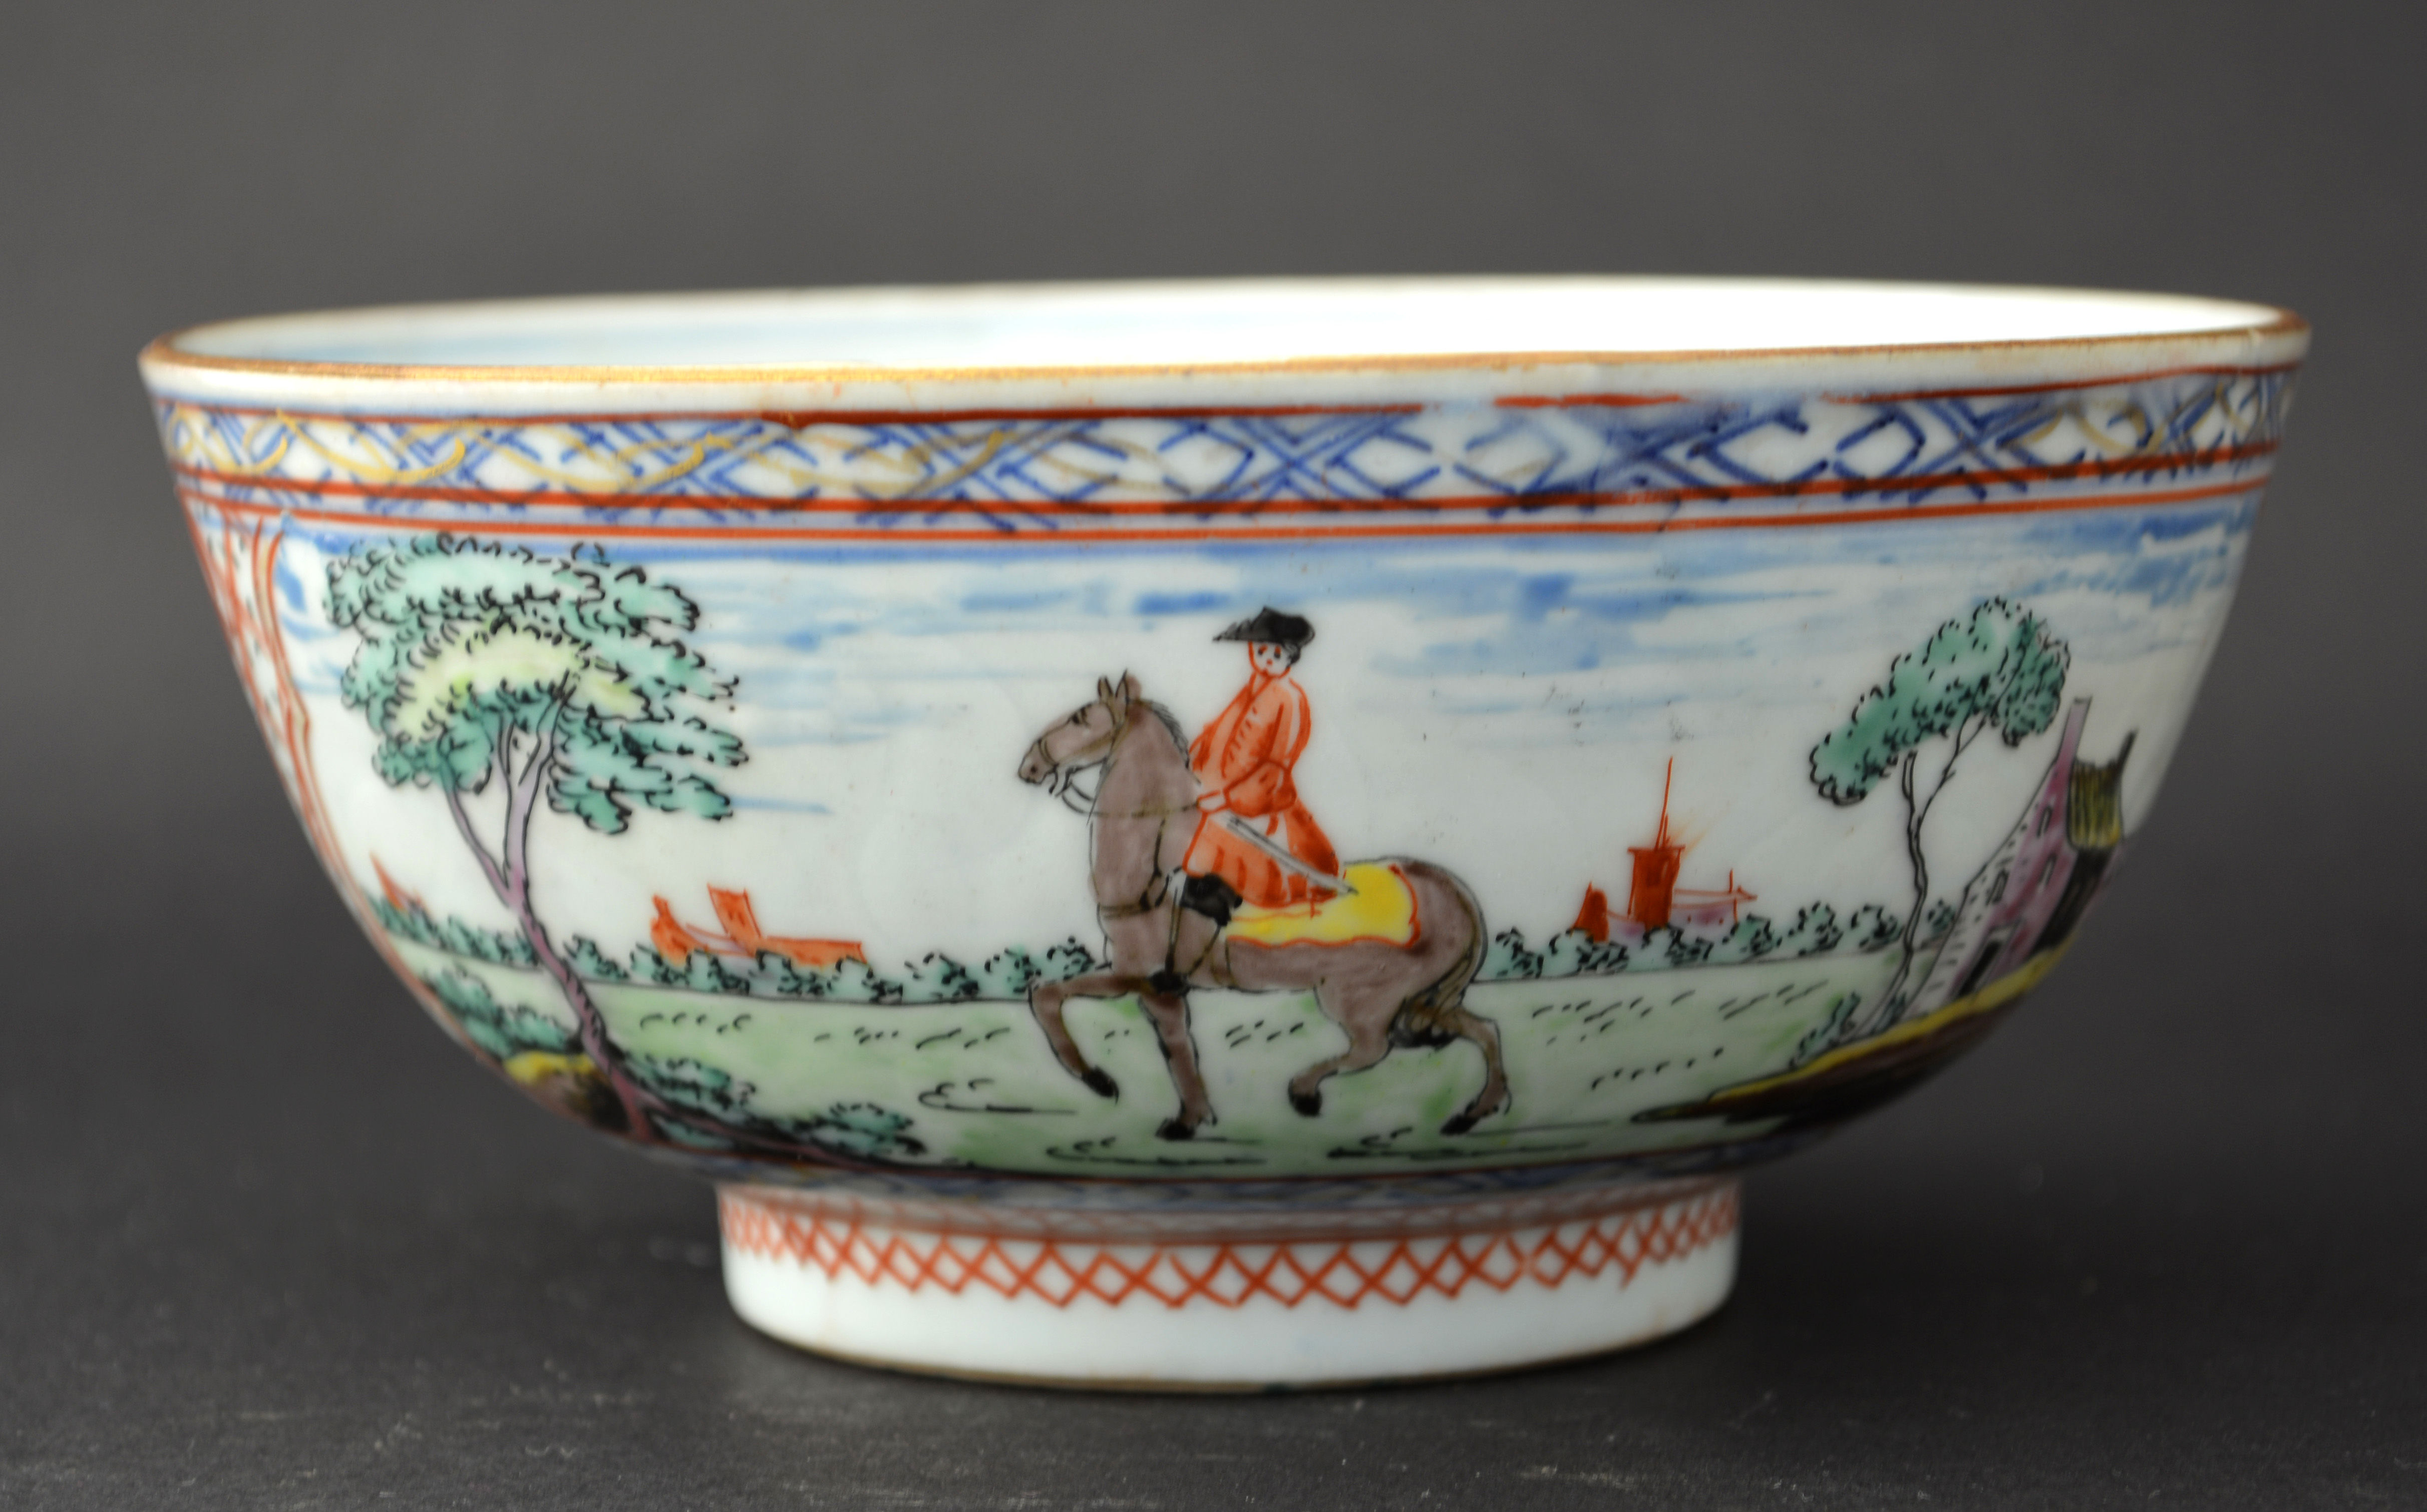 An 18th Century Chinese Export Porcelain Bowl with Dutch Decoration c